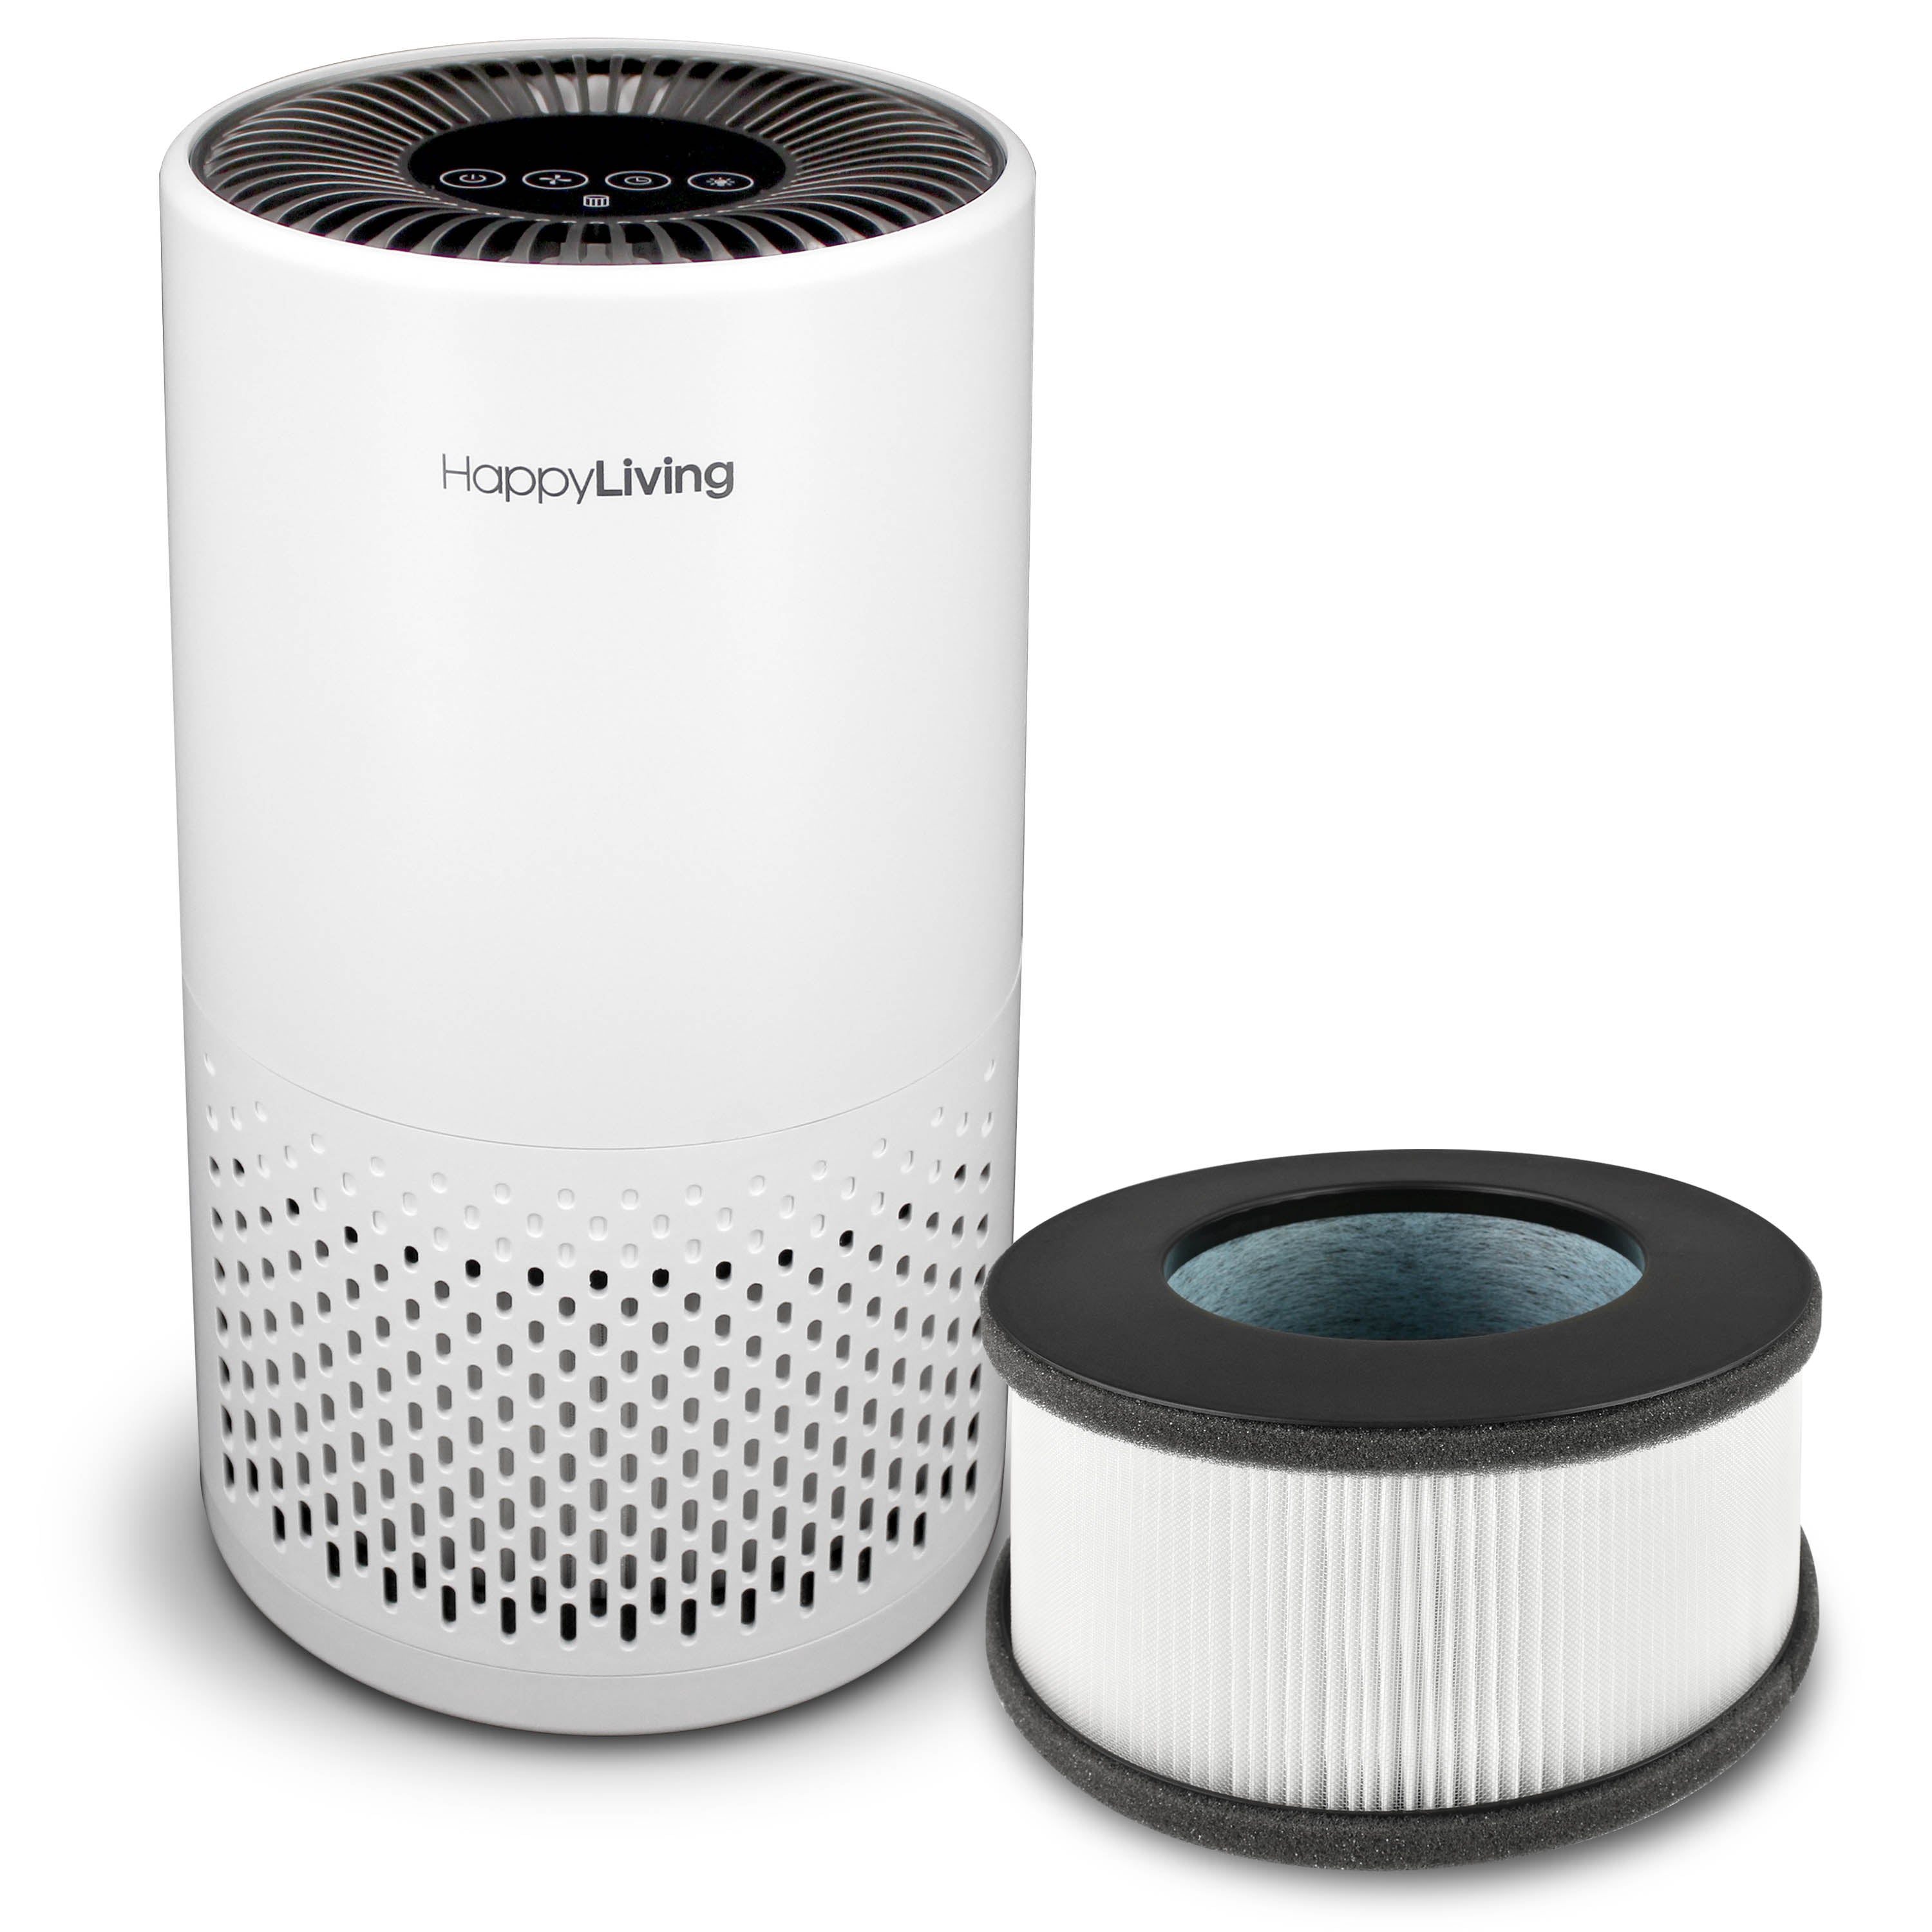 An image of a white HL-002 air purifier.